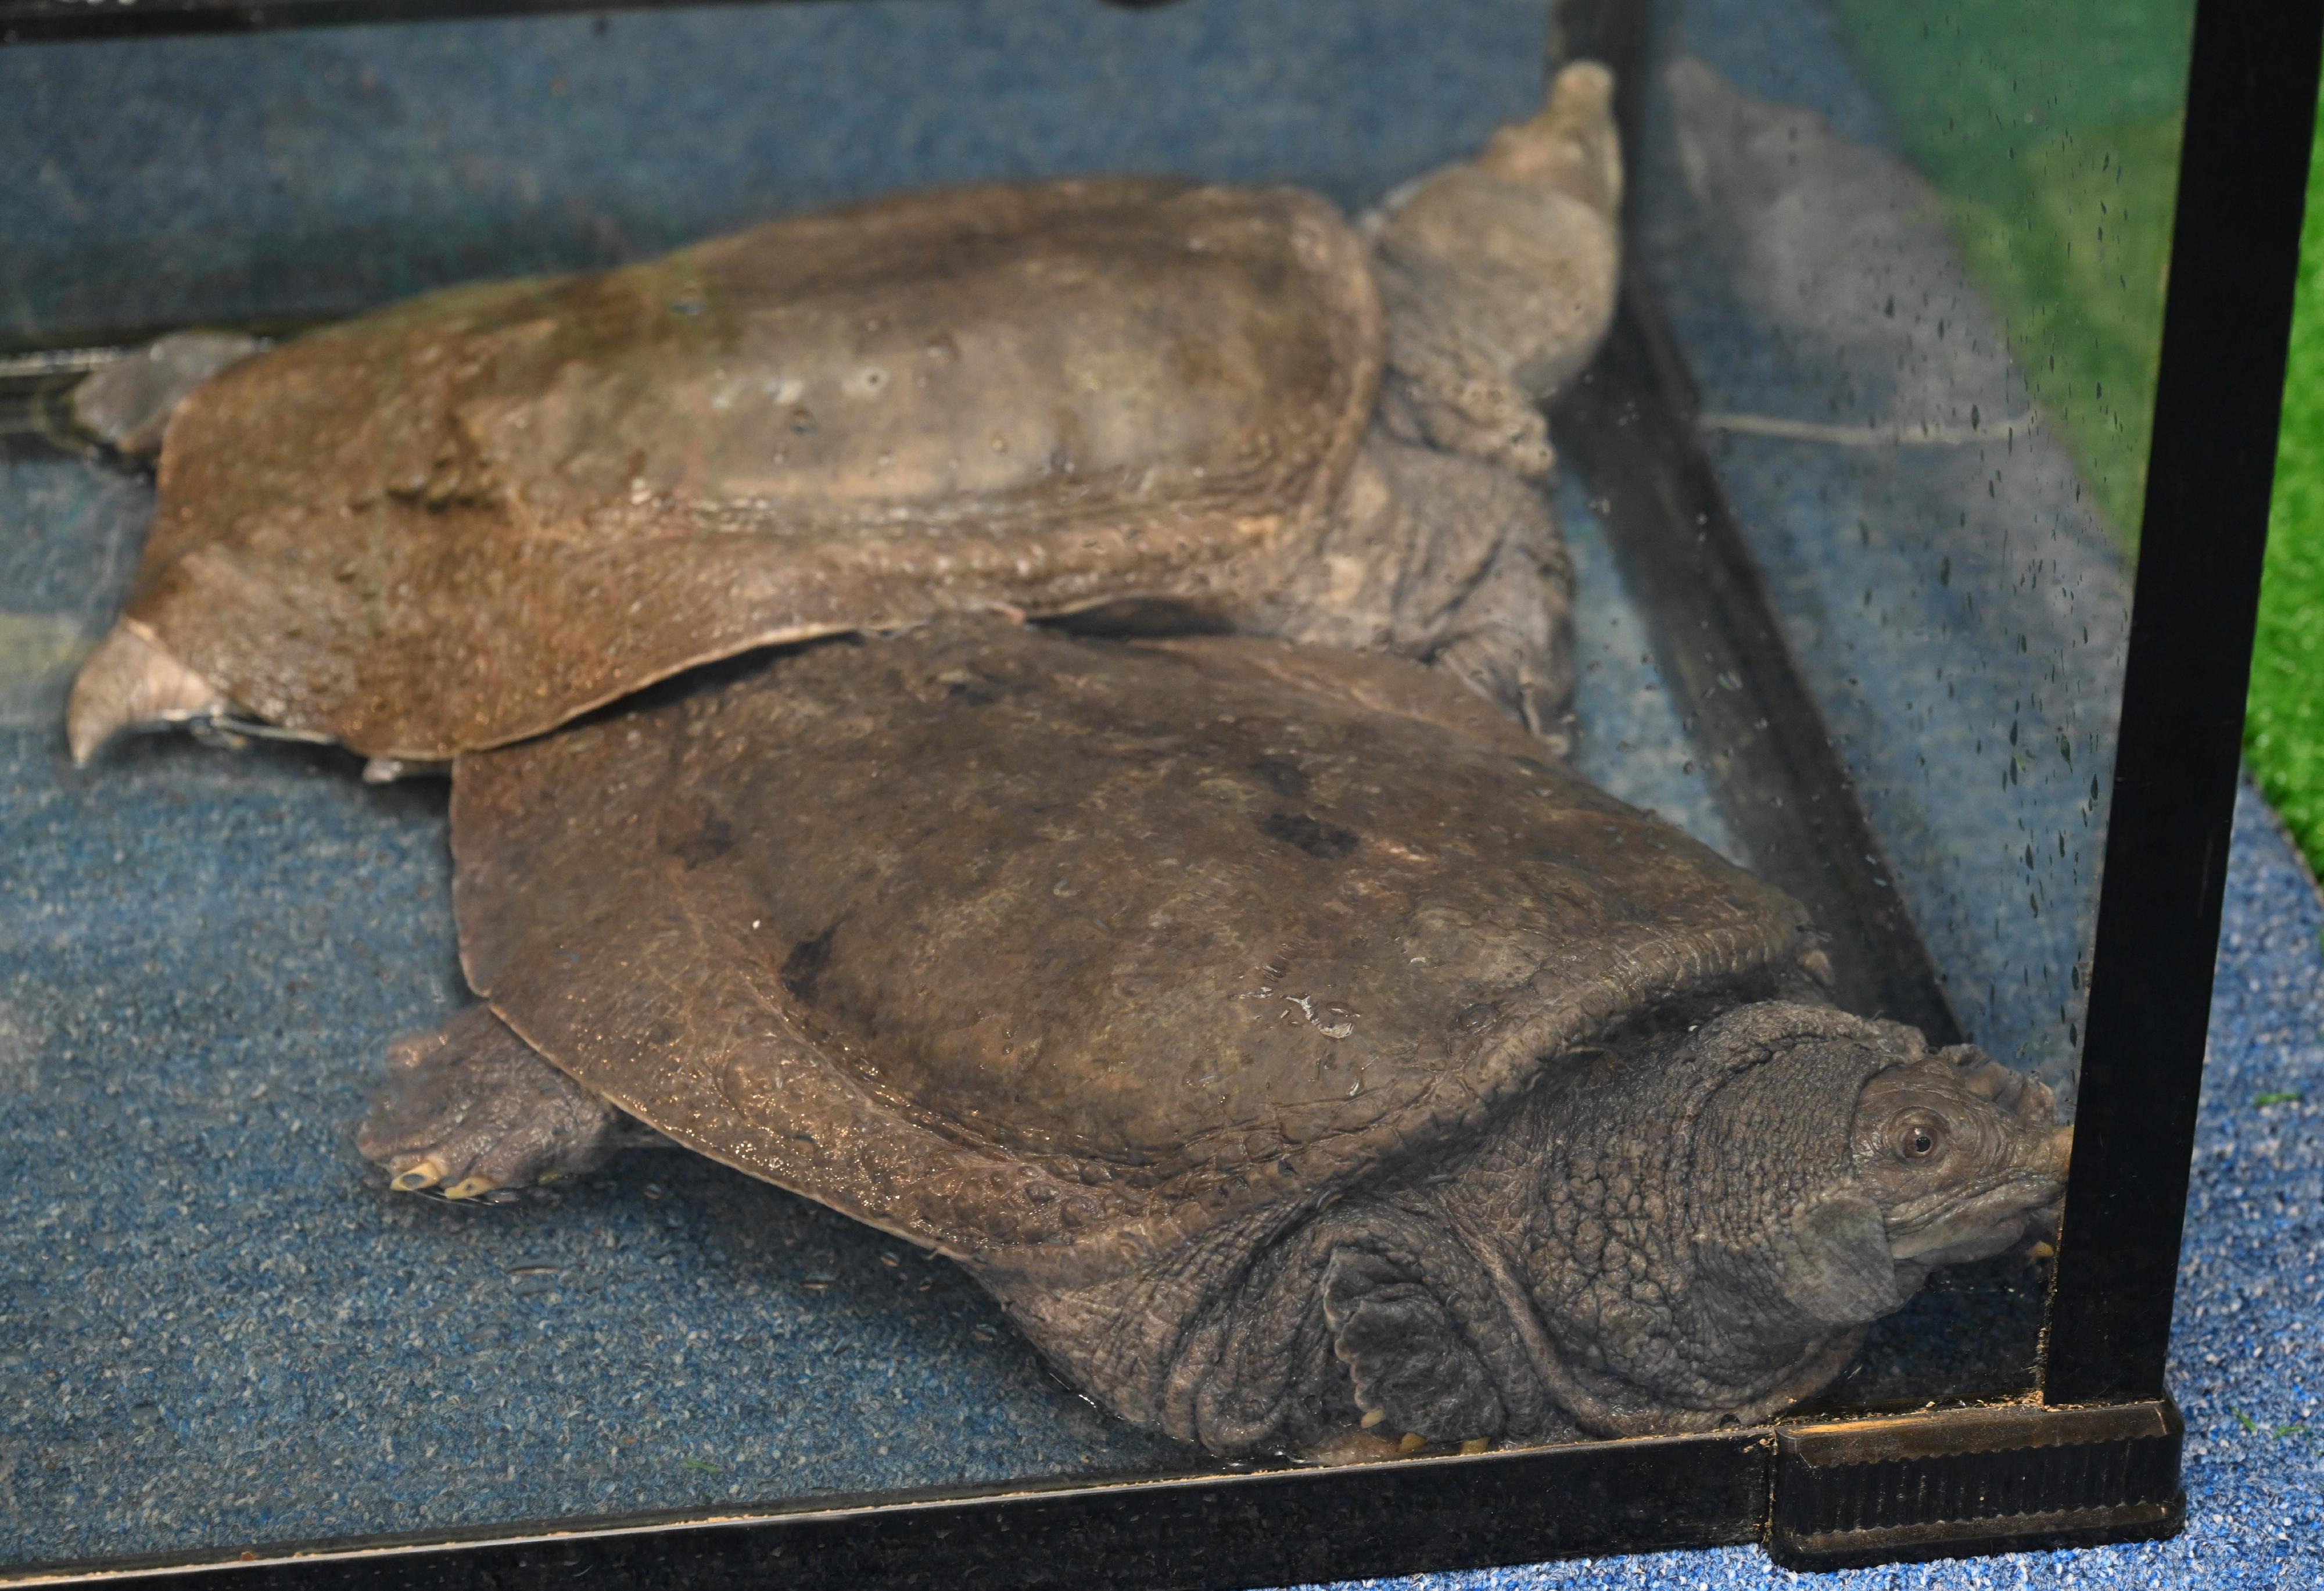 The Agriculture, Fisheries and Conservation Department conducted a joint operation with the Police on July 19. Twenty-nine specimens of endangered turtles, seven suspected turtle eggs and some tools suspected for hunting purposes were seized on some premises in Tai Po and a male suspect was arrested. Photo shows two of the seized wattle-necked softshell turtles (Palea steindachneri).